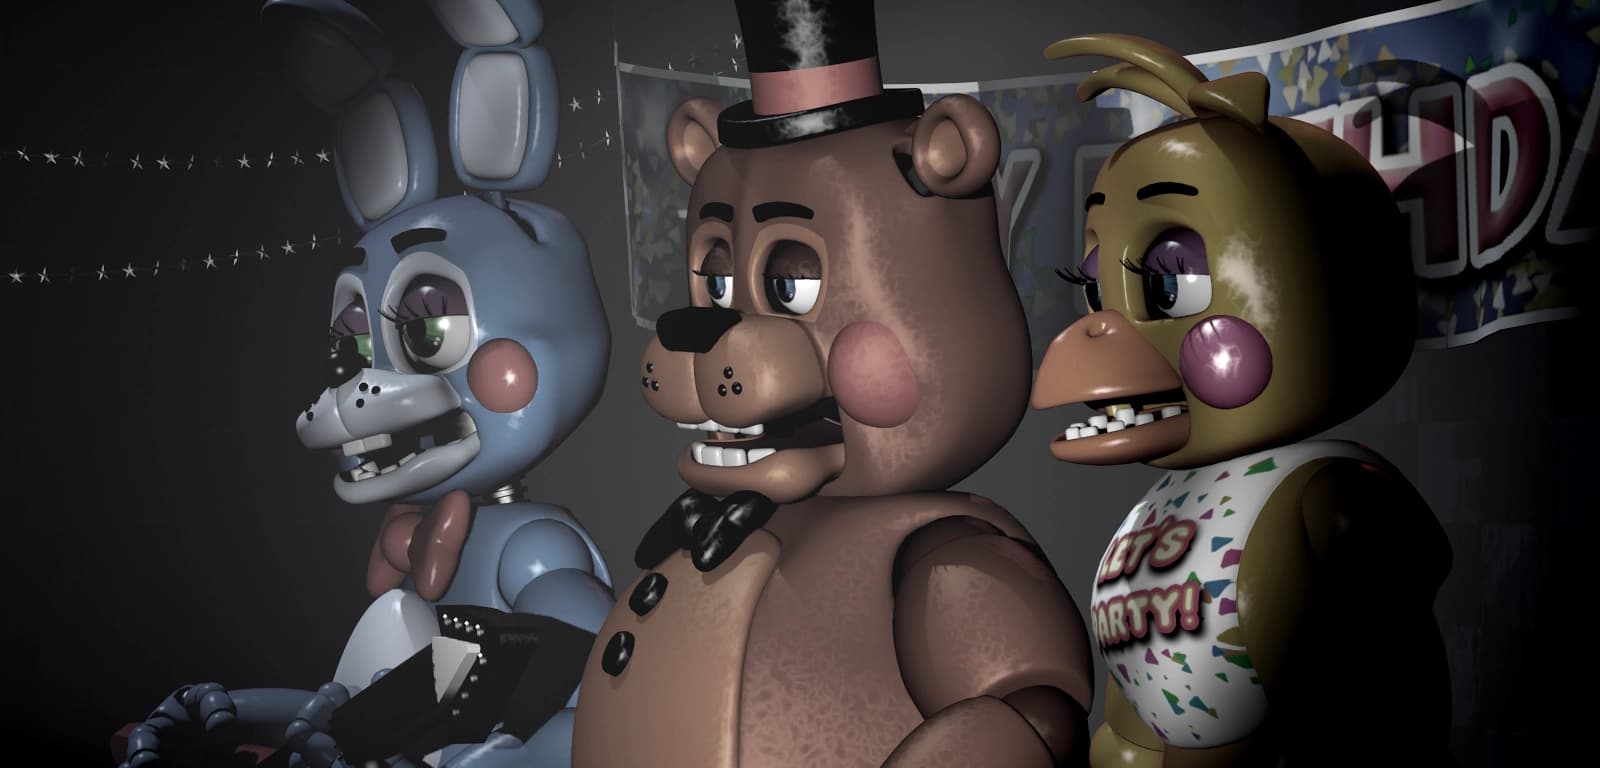 The Ultimate Five Nights at Freddy's Quiz